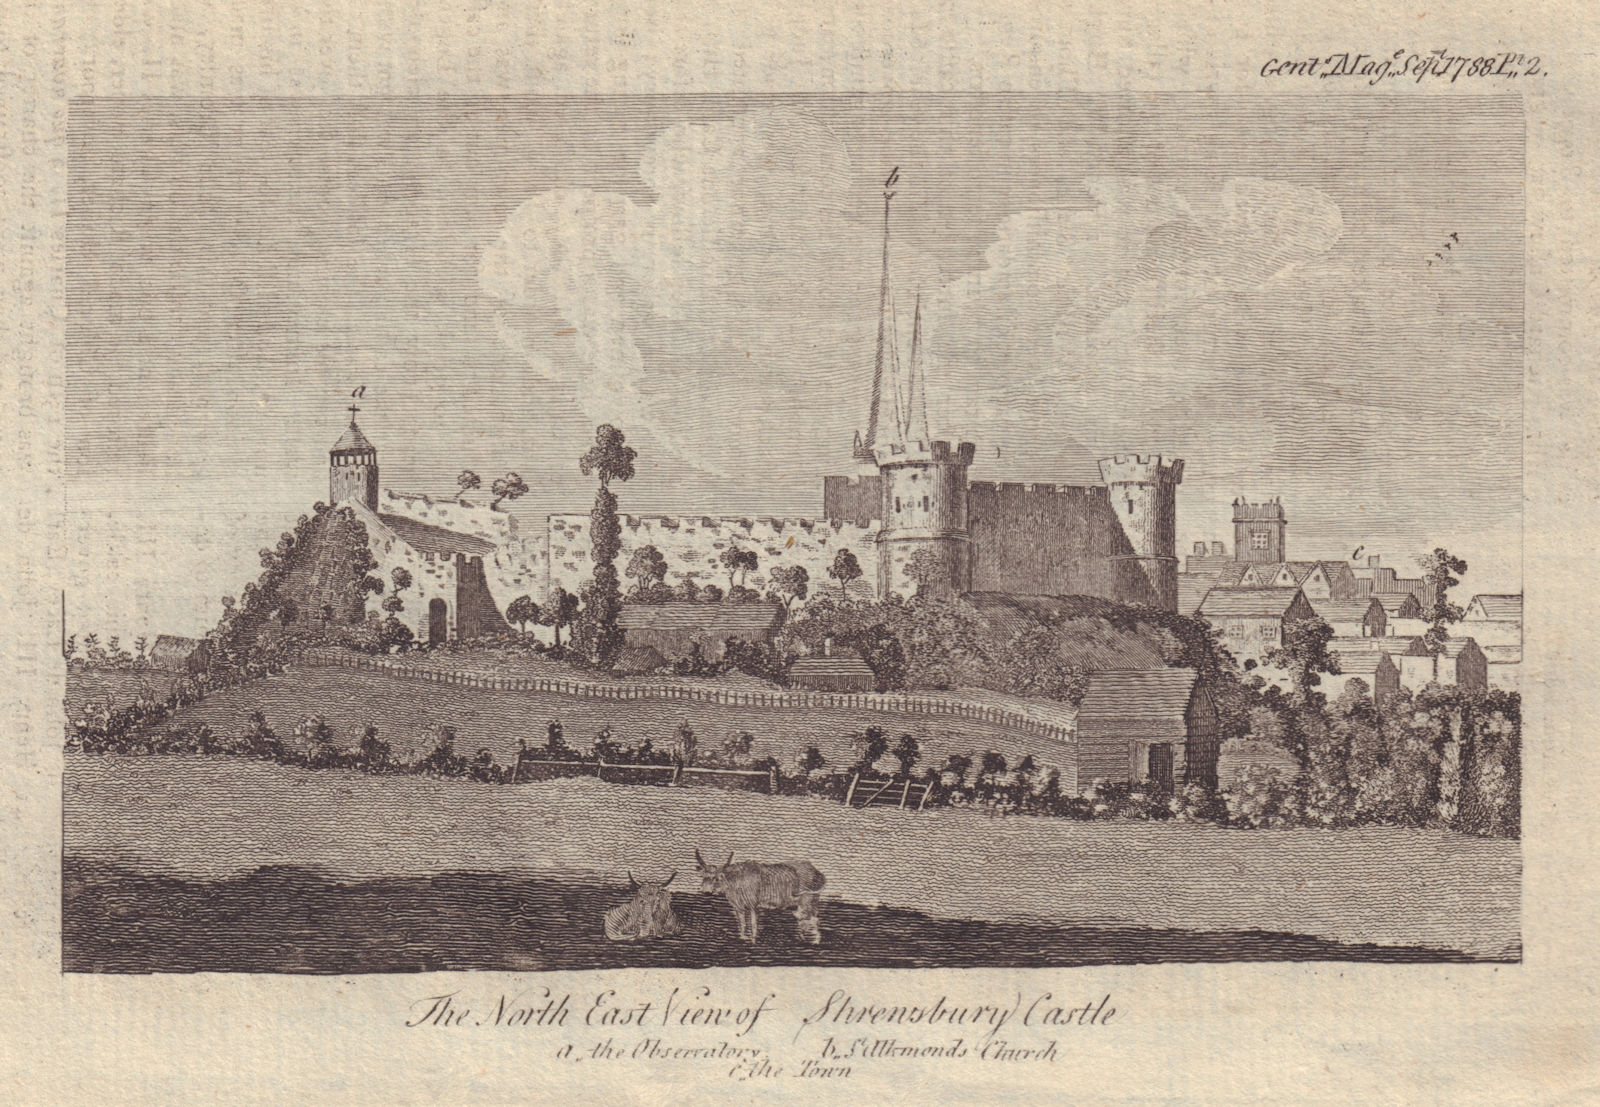 The North East View of Shrewsbury Castle, Shropshire. GENTS MAG 1788 old print